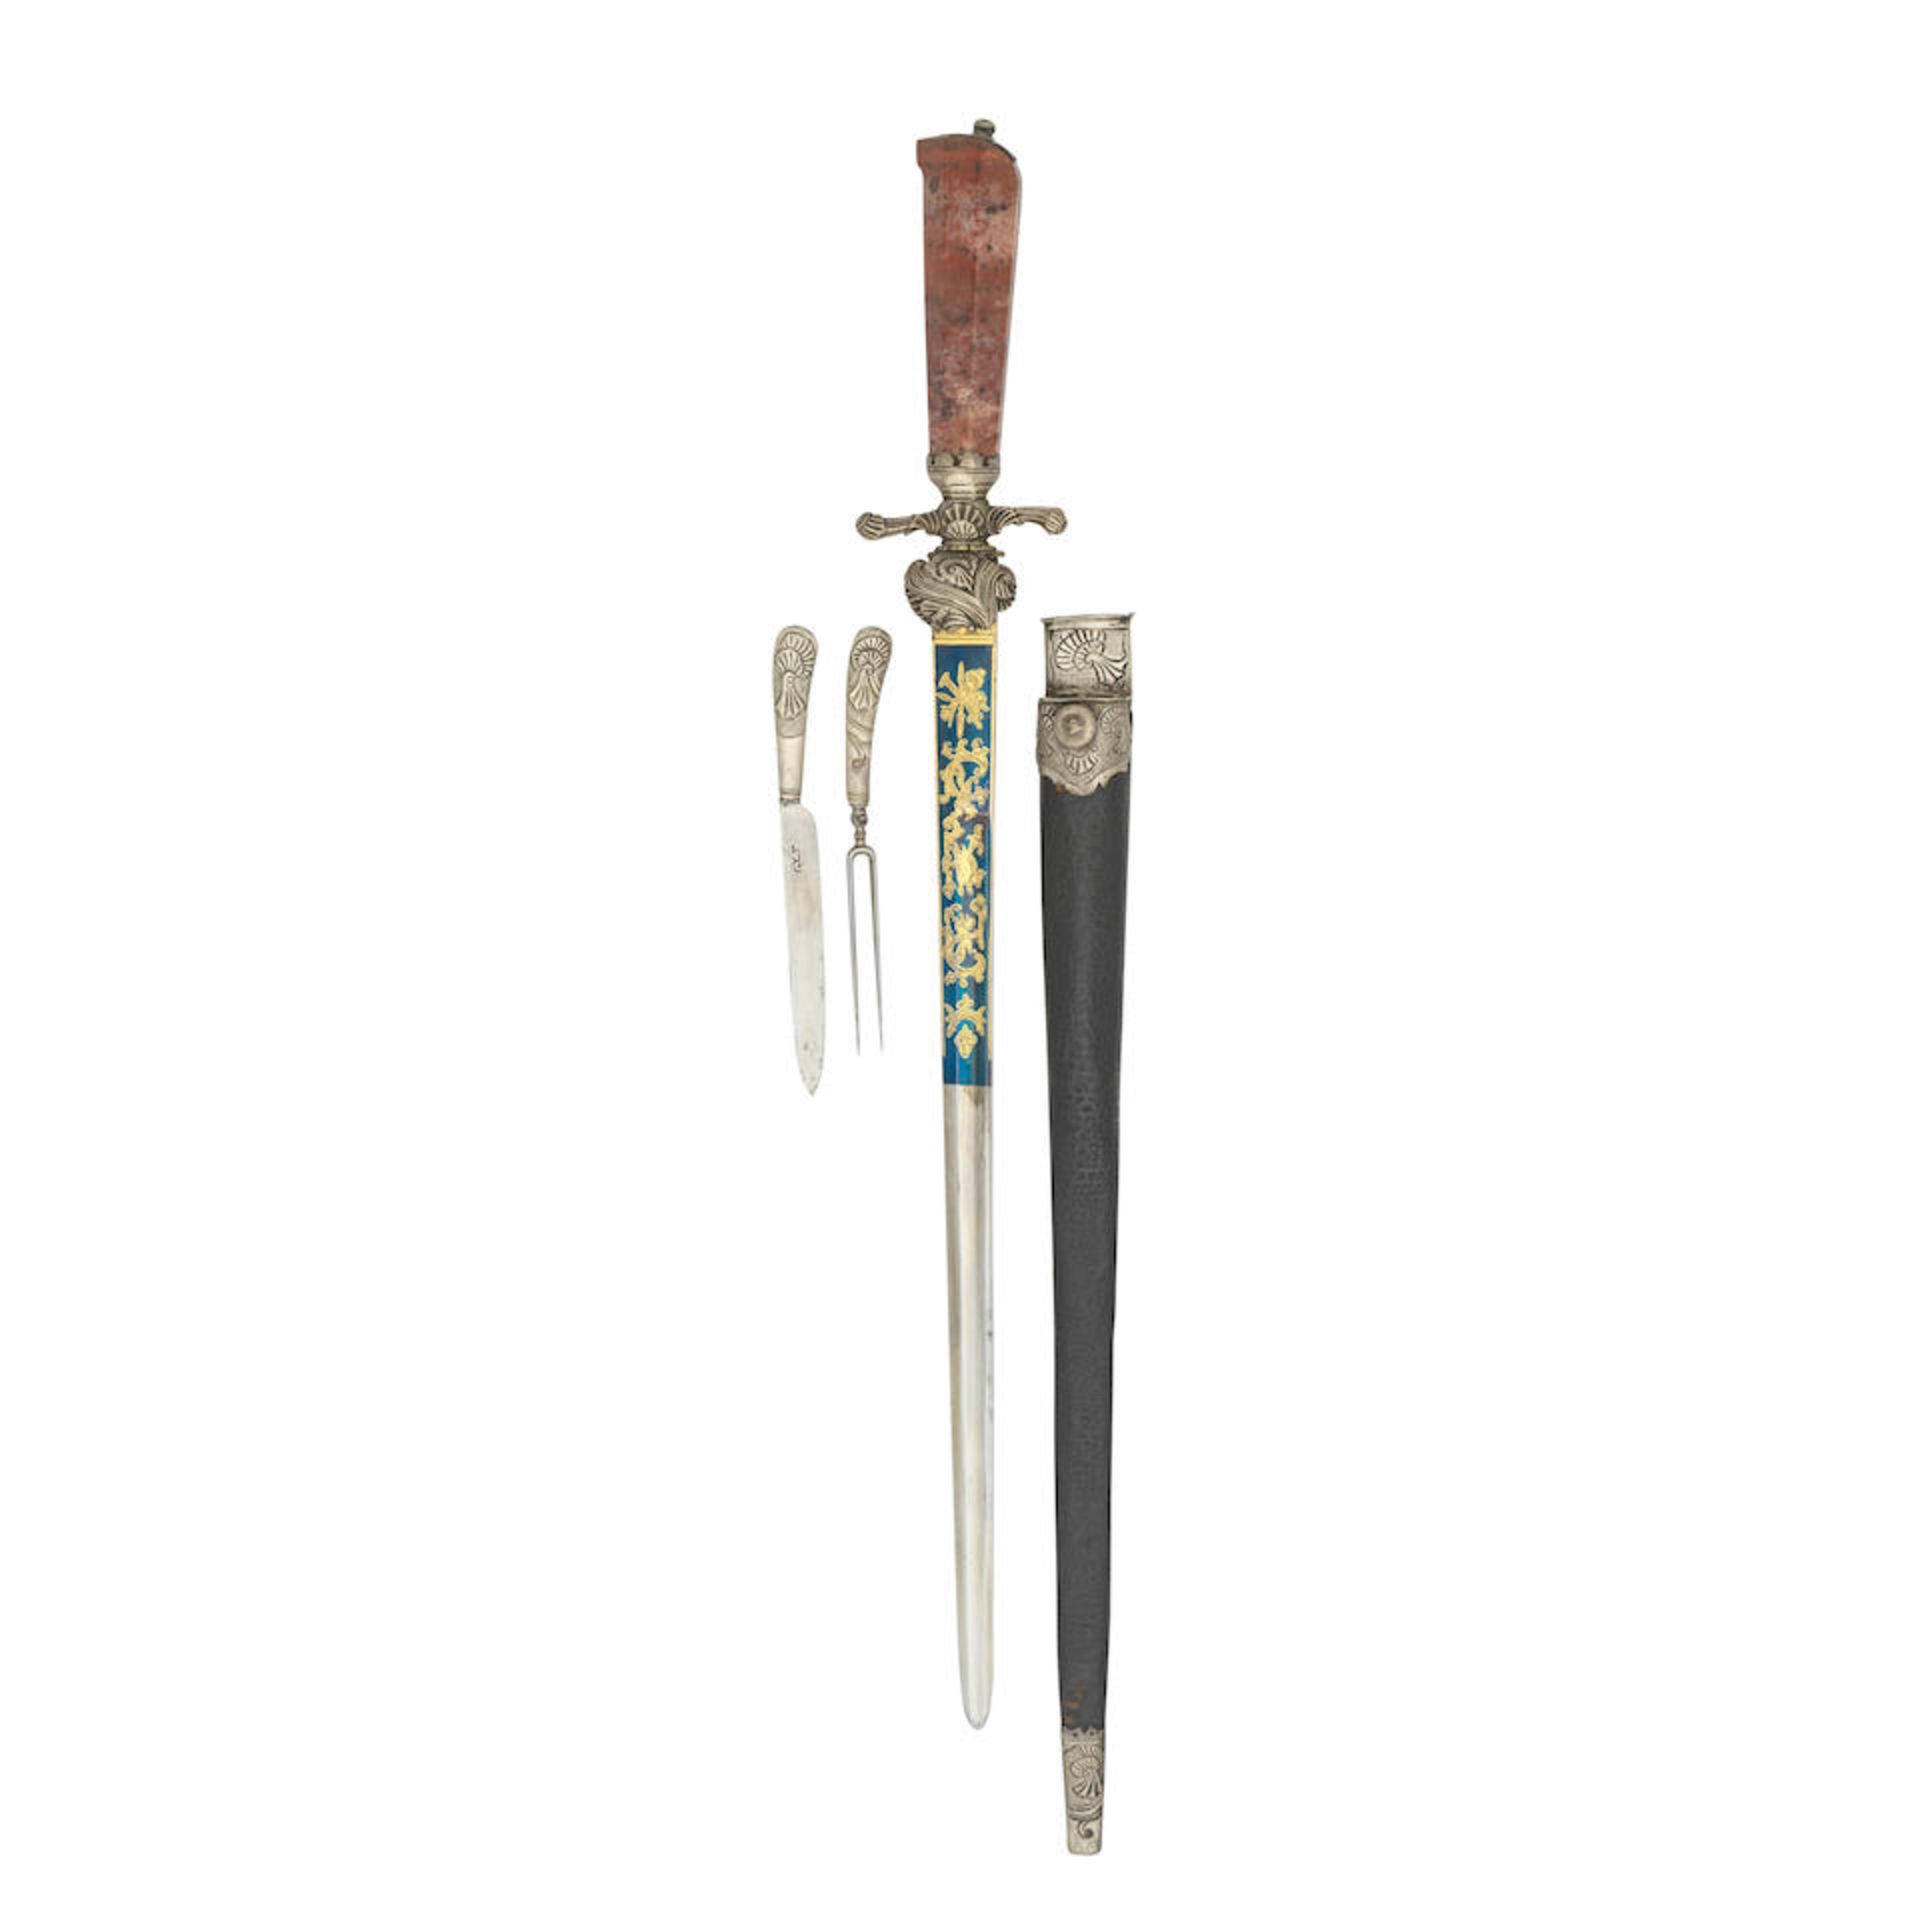 A German Silver-Mounted Hunting Sword